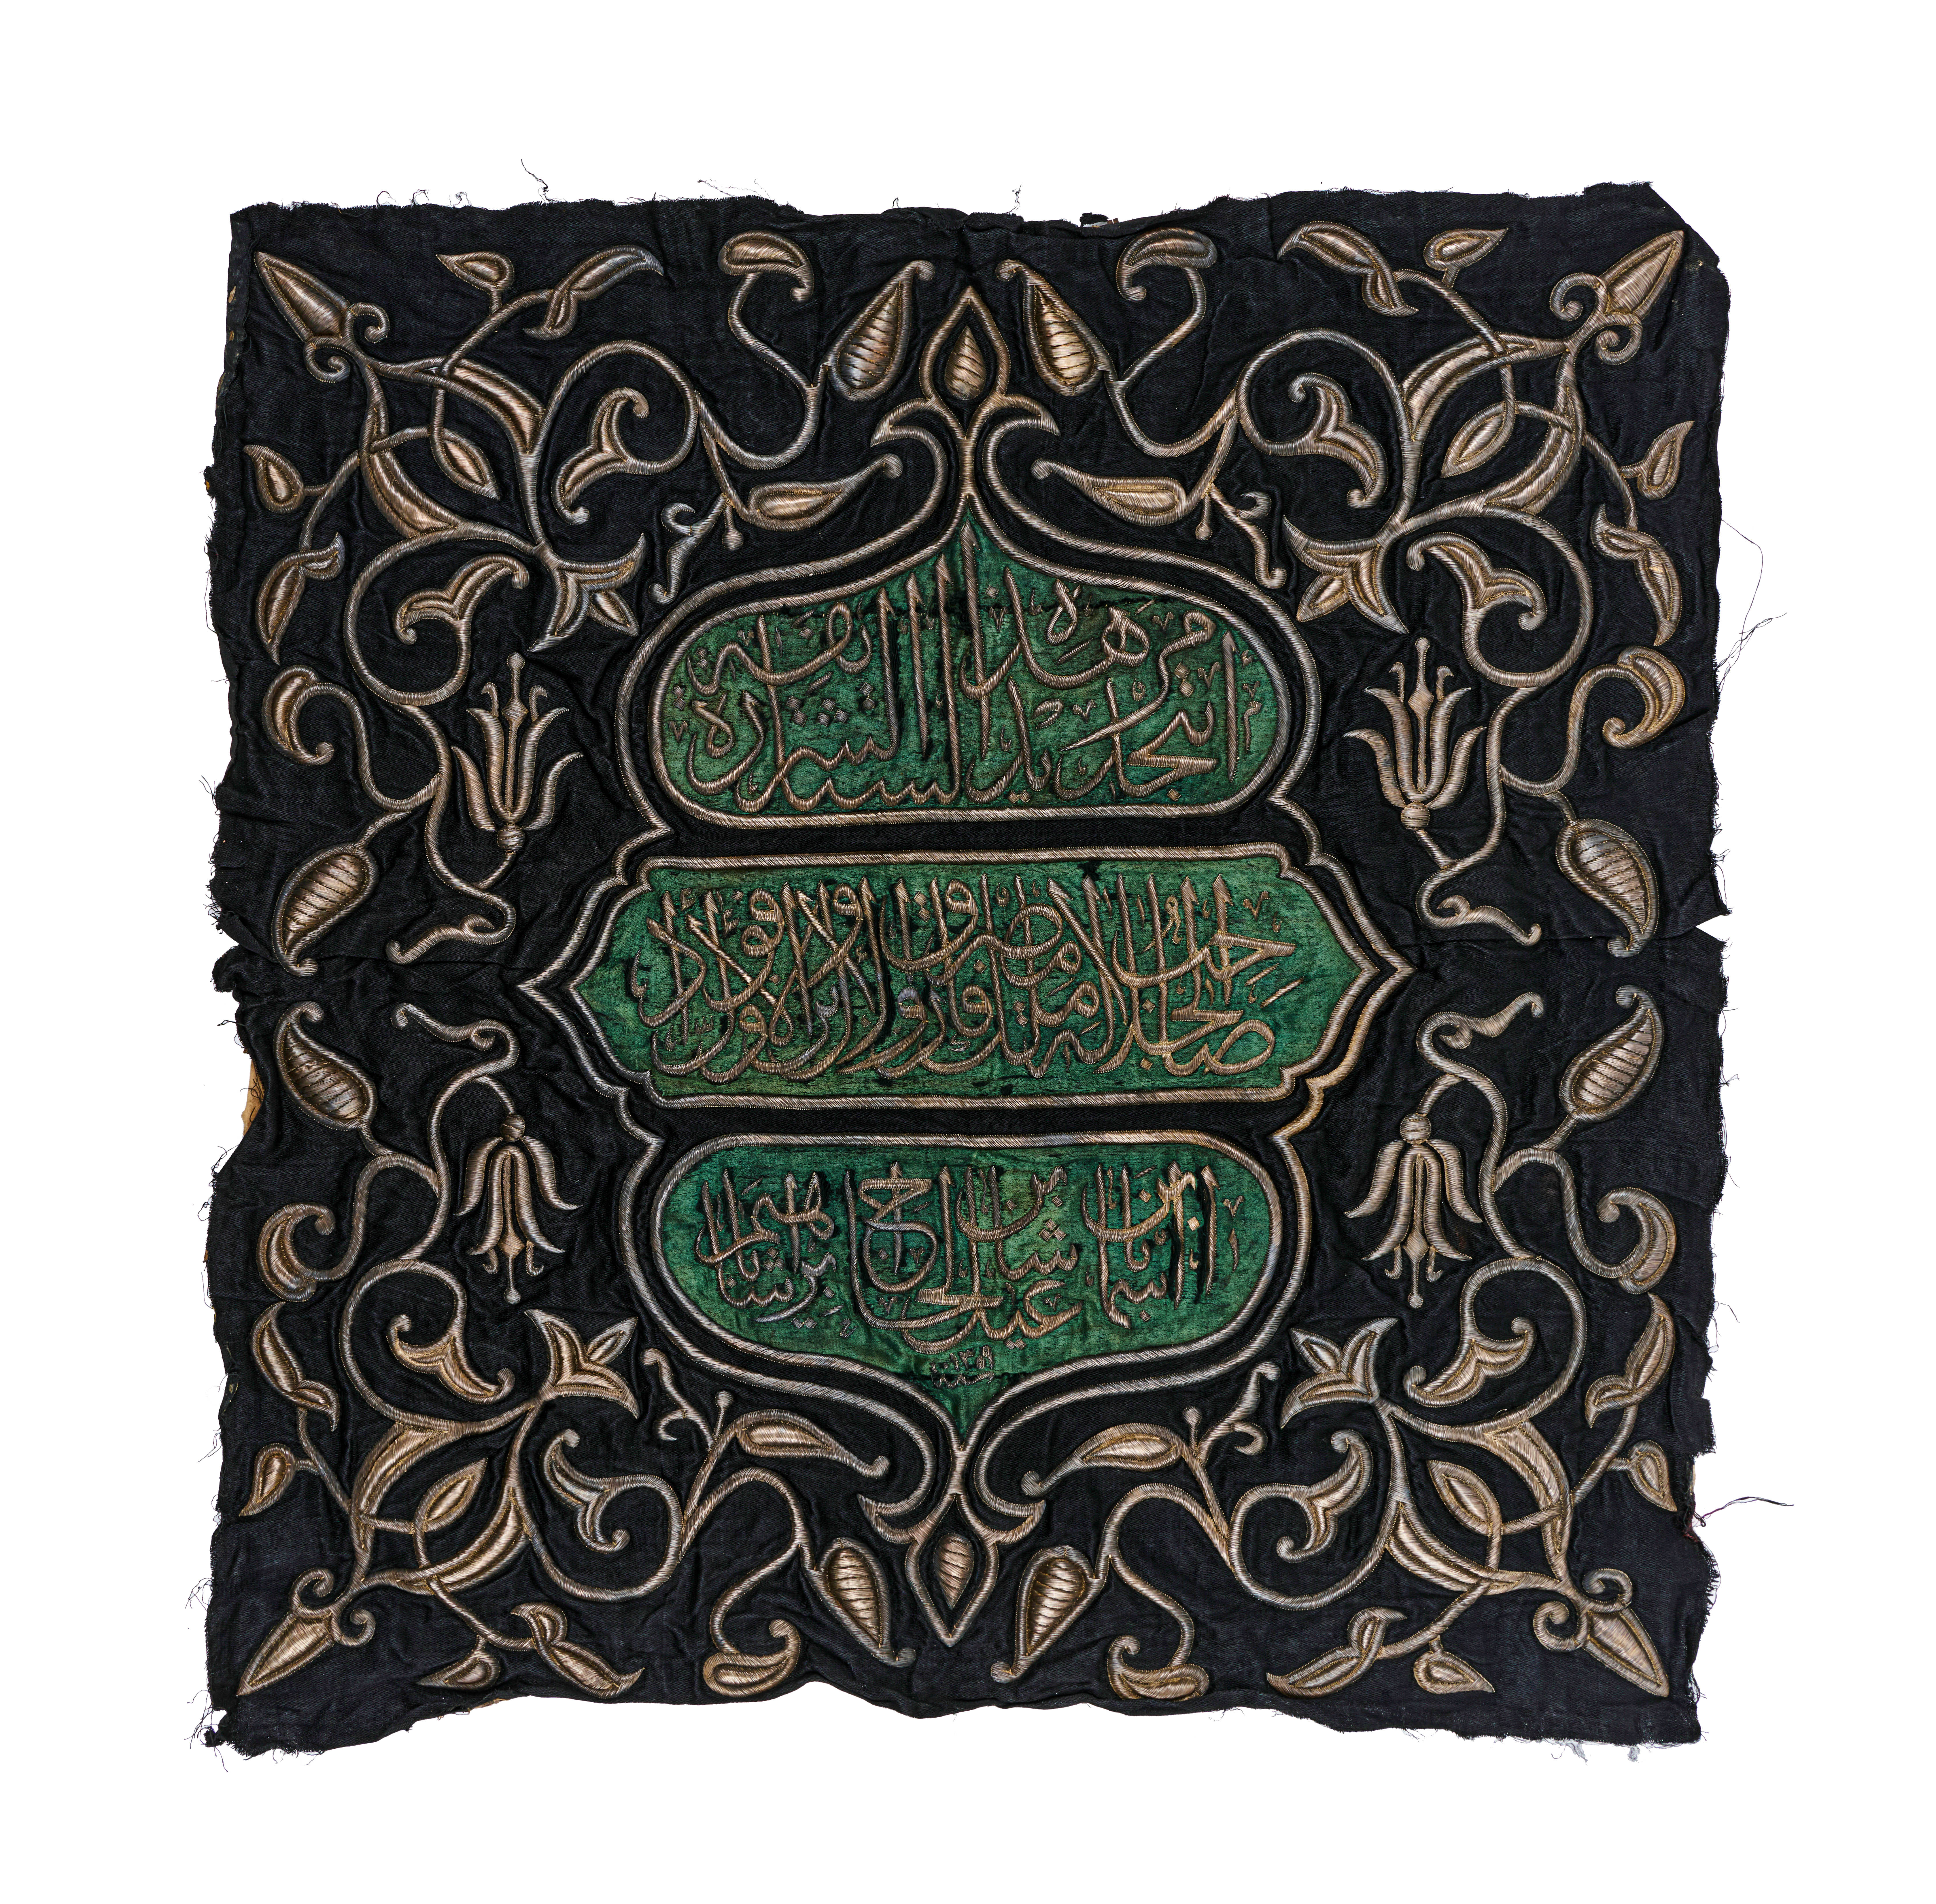 A GILT AND SILVER EMBROIDERED METAL THREAD TEXTILE HANGING DATED 1309AH, 19TH CENTURY